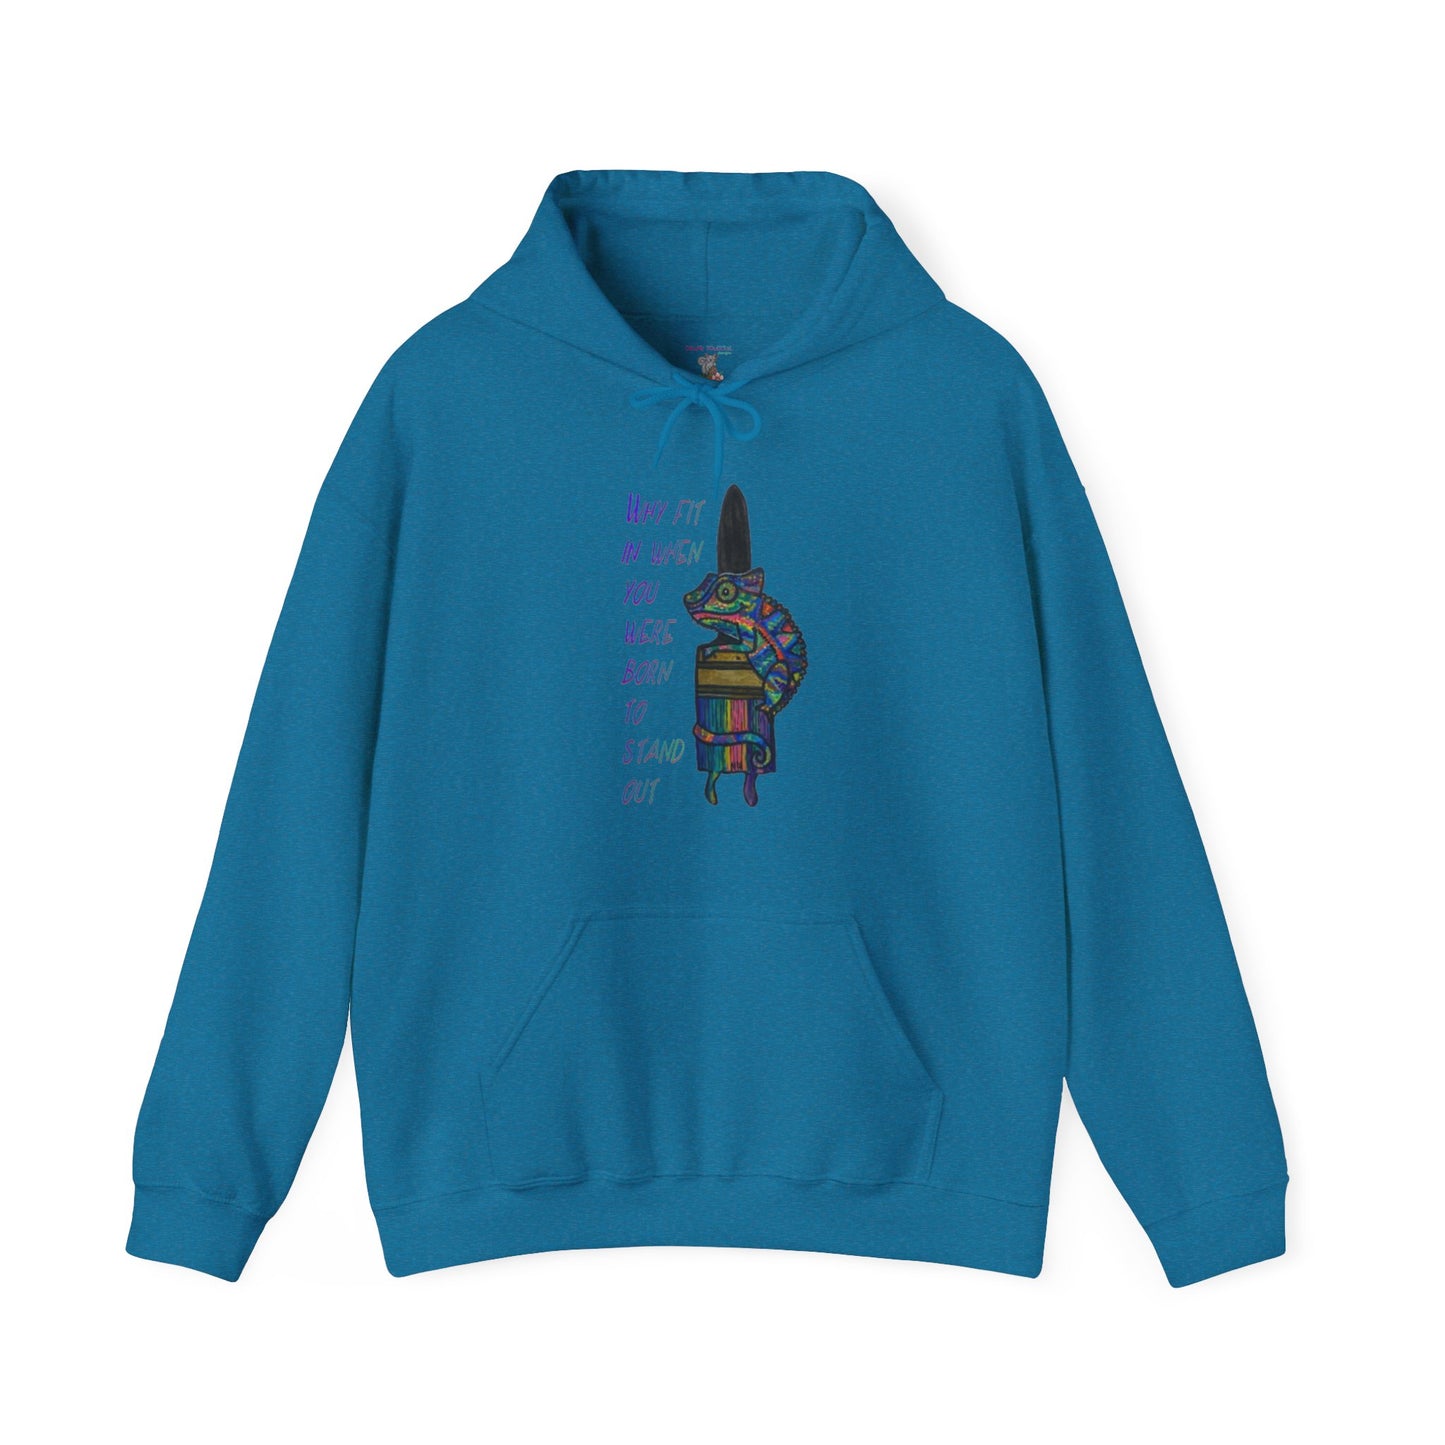 Why fit in when you were born to stand out - Unisex Heavy Blend™ Hooded Sweatshirt